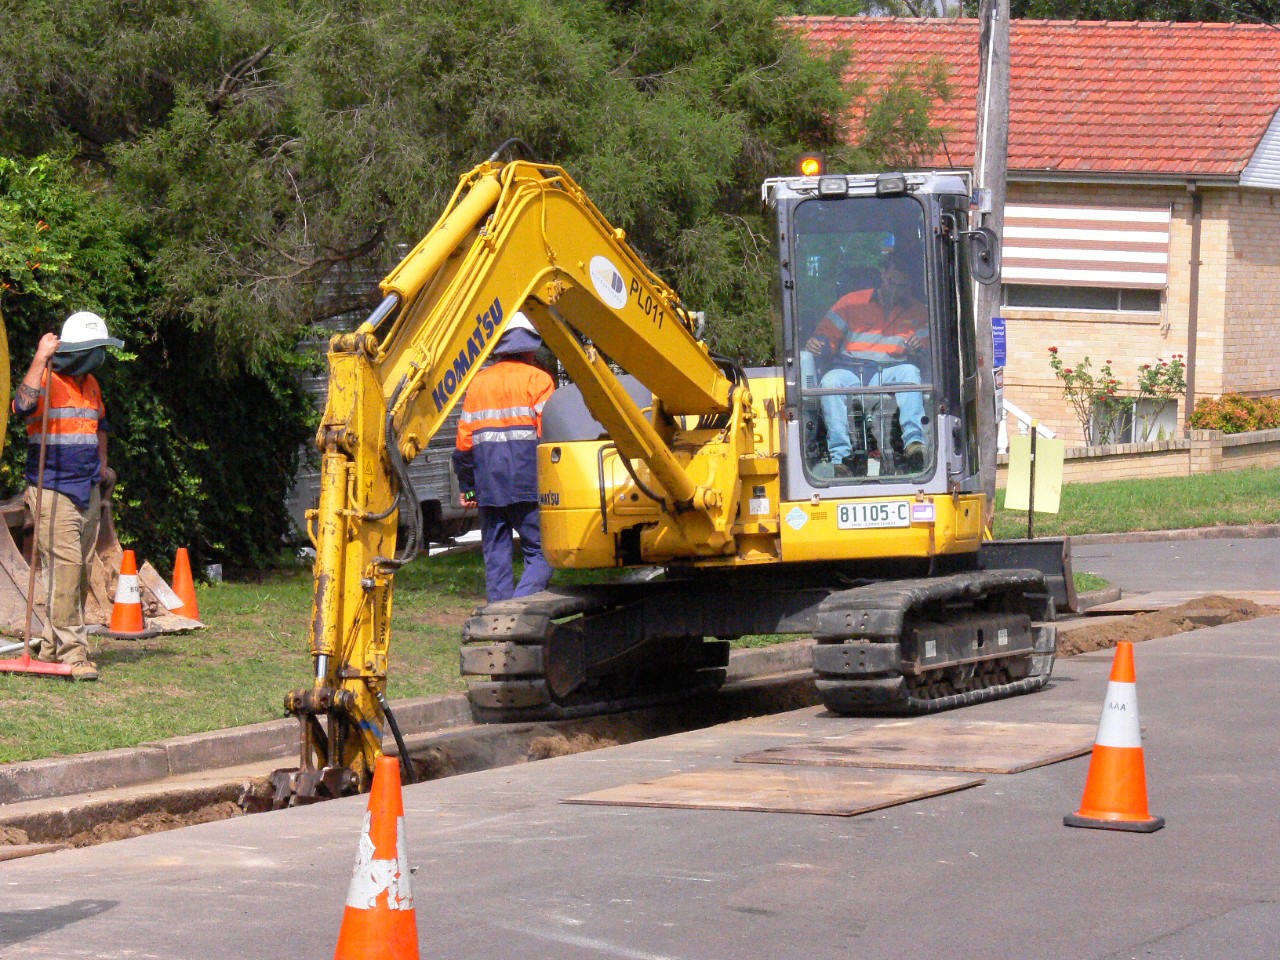 Machinery digging trench in a street.